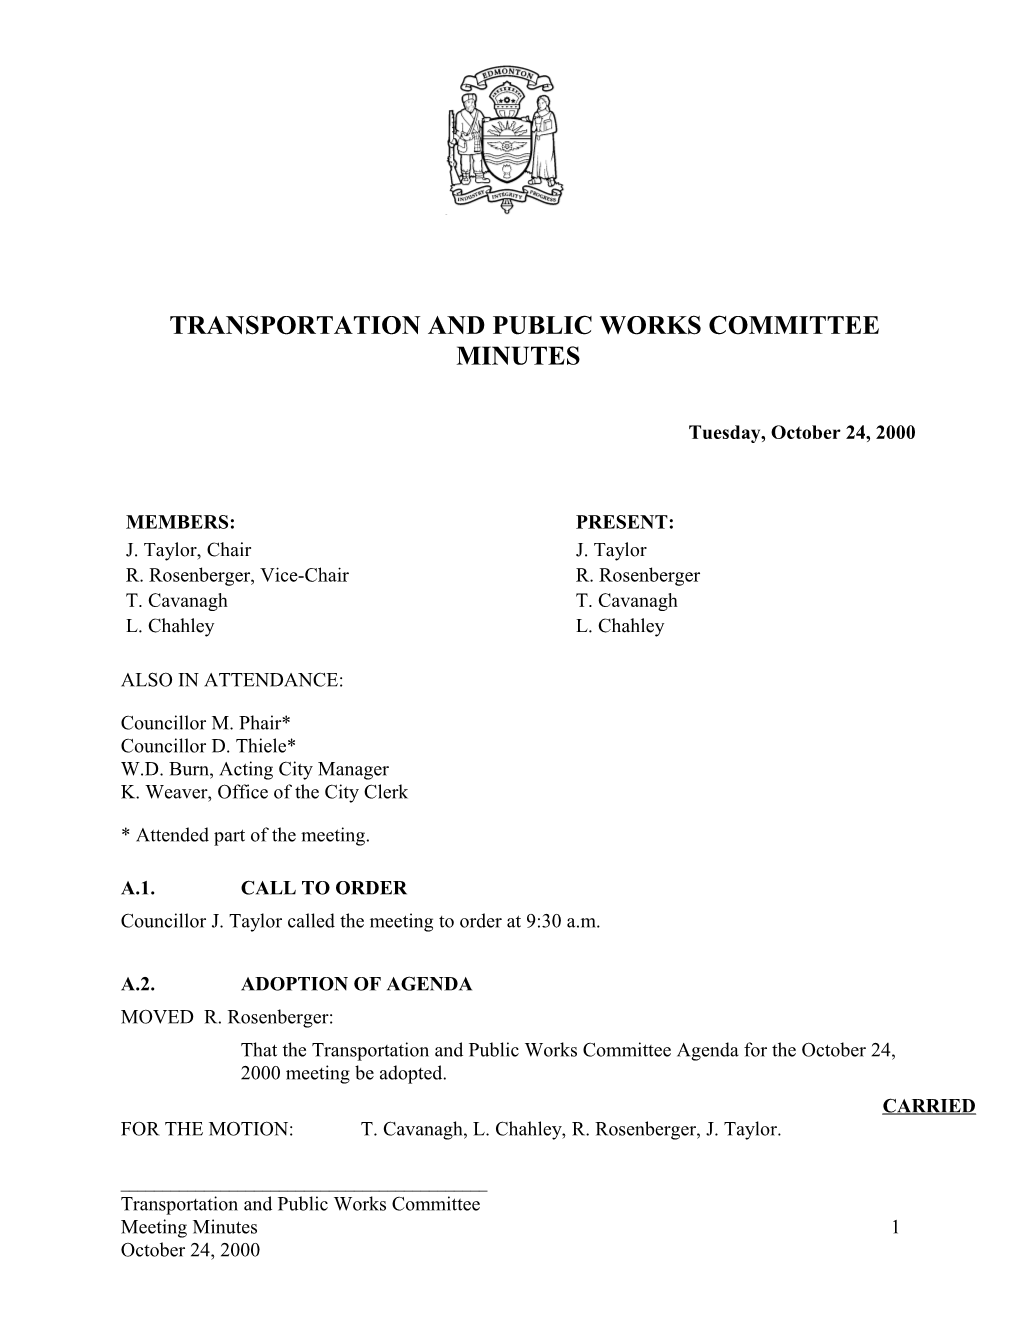 Minutes for Transportation and Public Works Committee October 24, 2000 Meeting